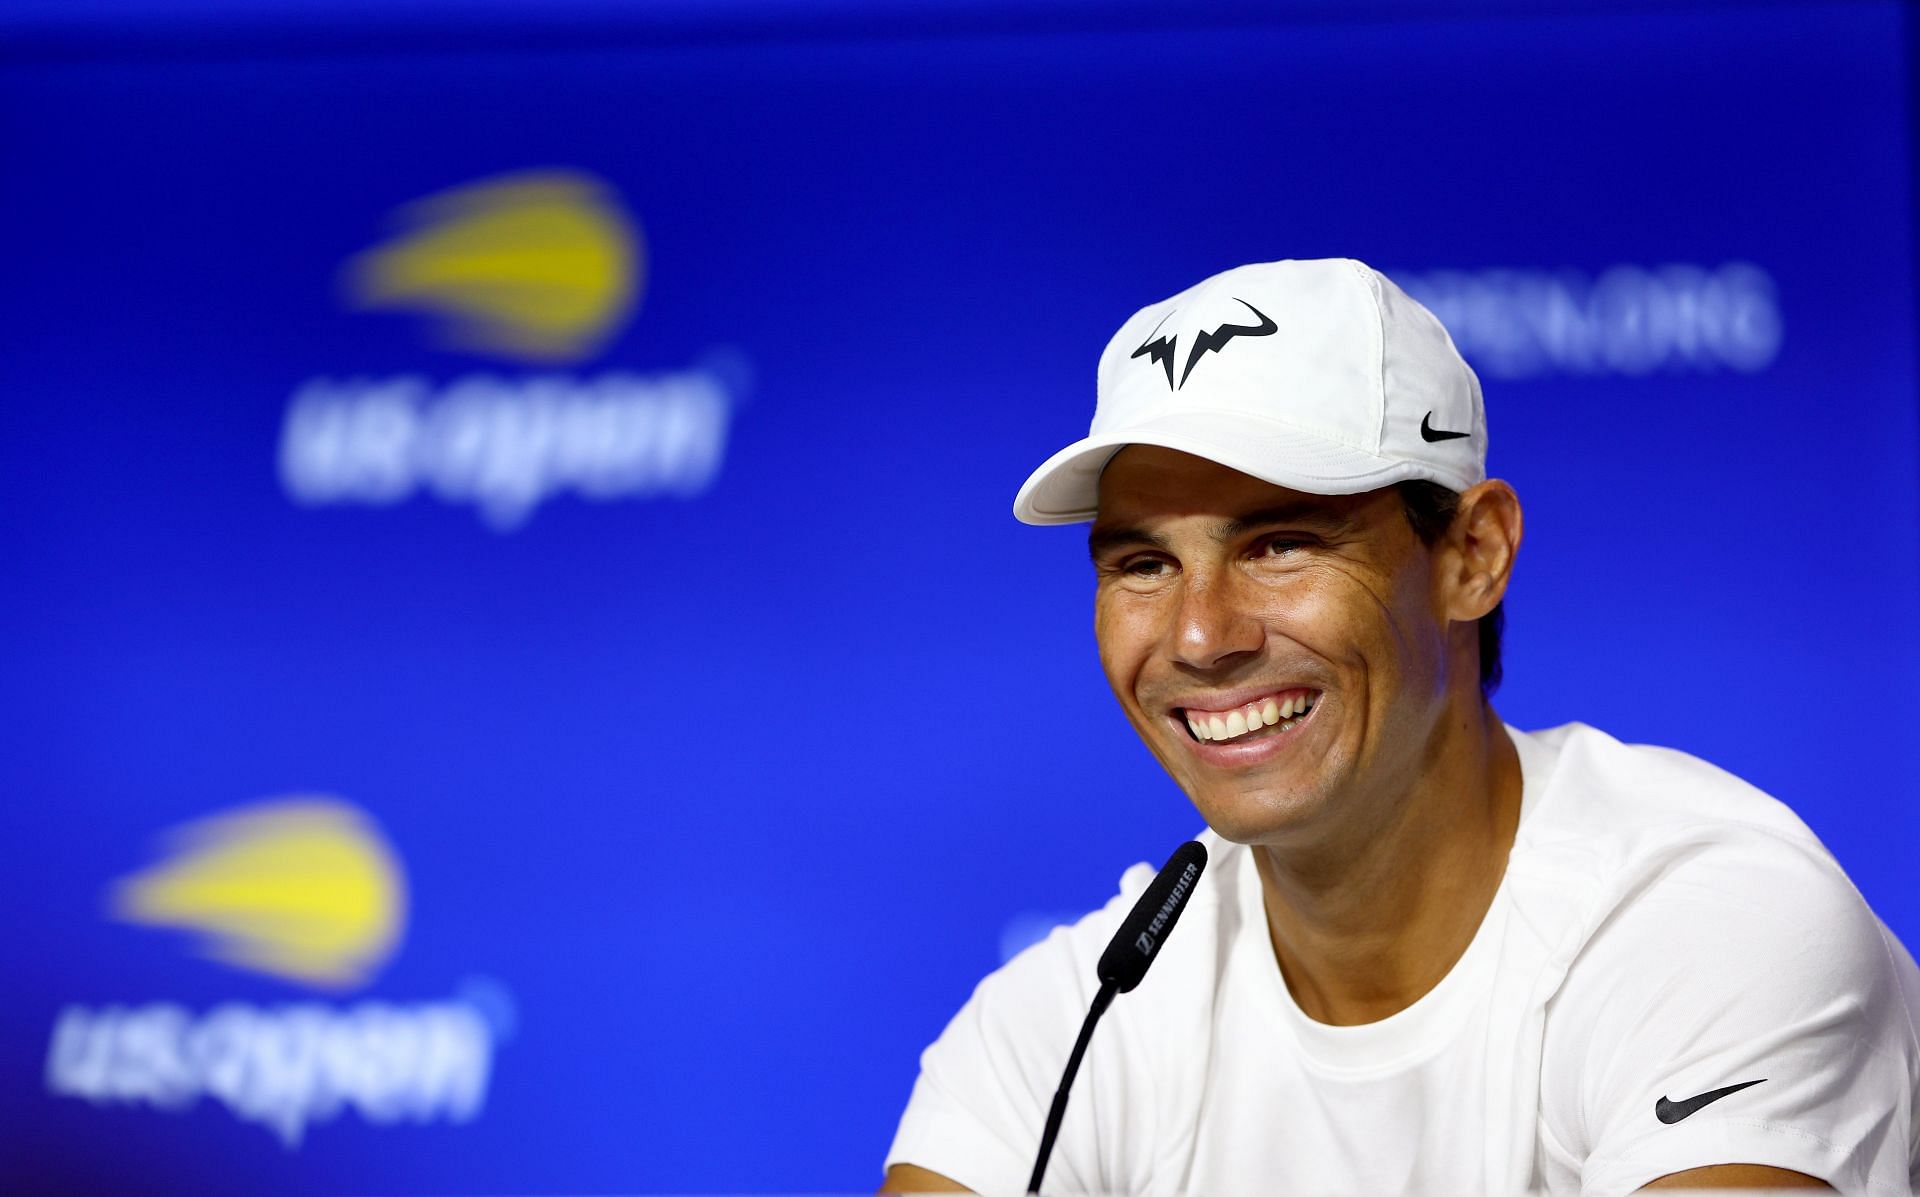 The Spaniard during a press conference